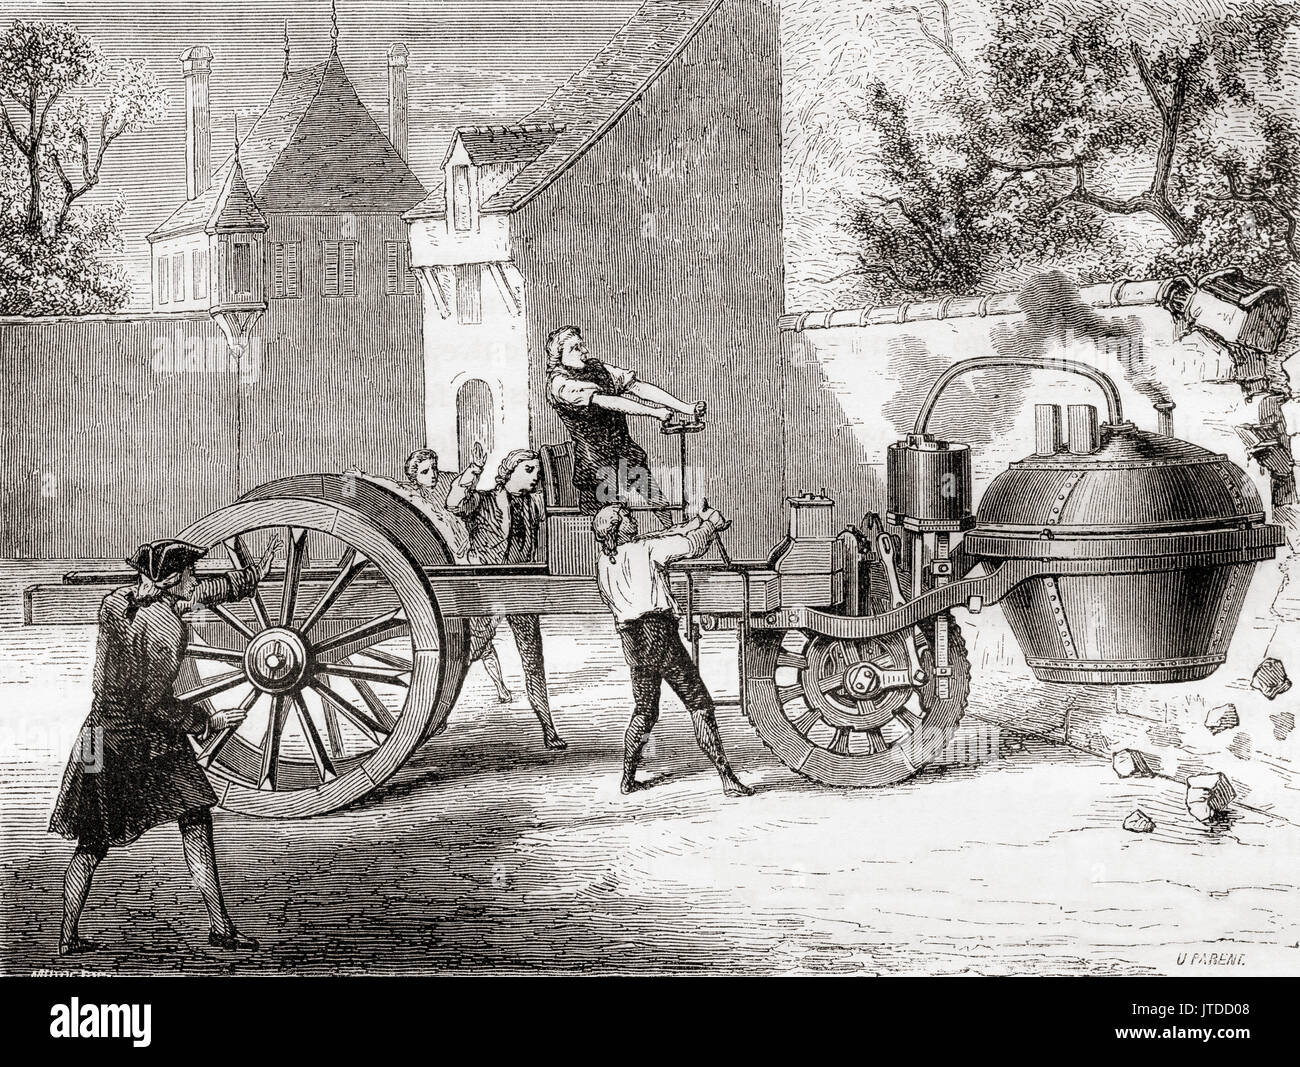 The first steam powered car, built by Cugnot, loses control and knocks down part of the arsenal's walls, Paris, France,1770. Nicolas-Joseph Cugnot, 1725 – 1804.  French inventor, builder of the first working self-propelled land-based mechanical vehicle, the world's first automobile.  From Les Merveilles de la Science, published 1870. Stock Photo